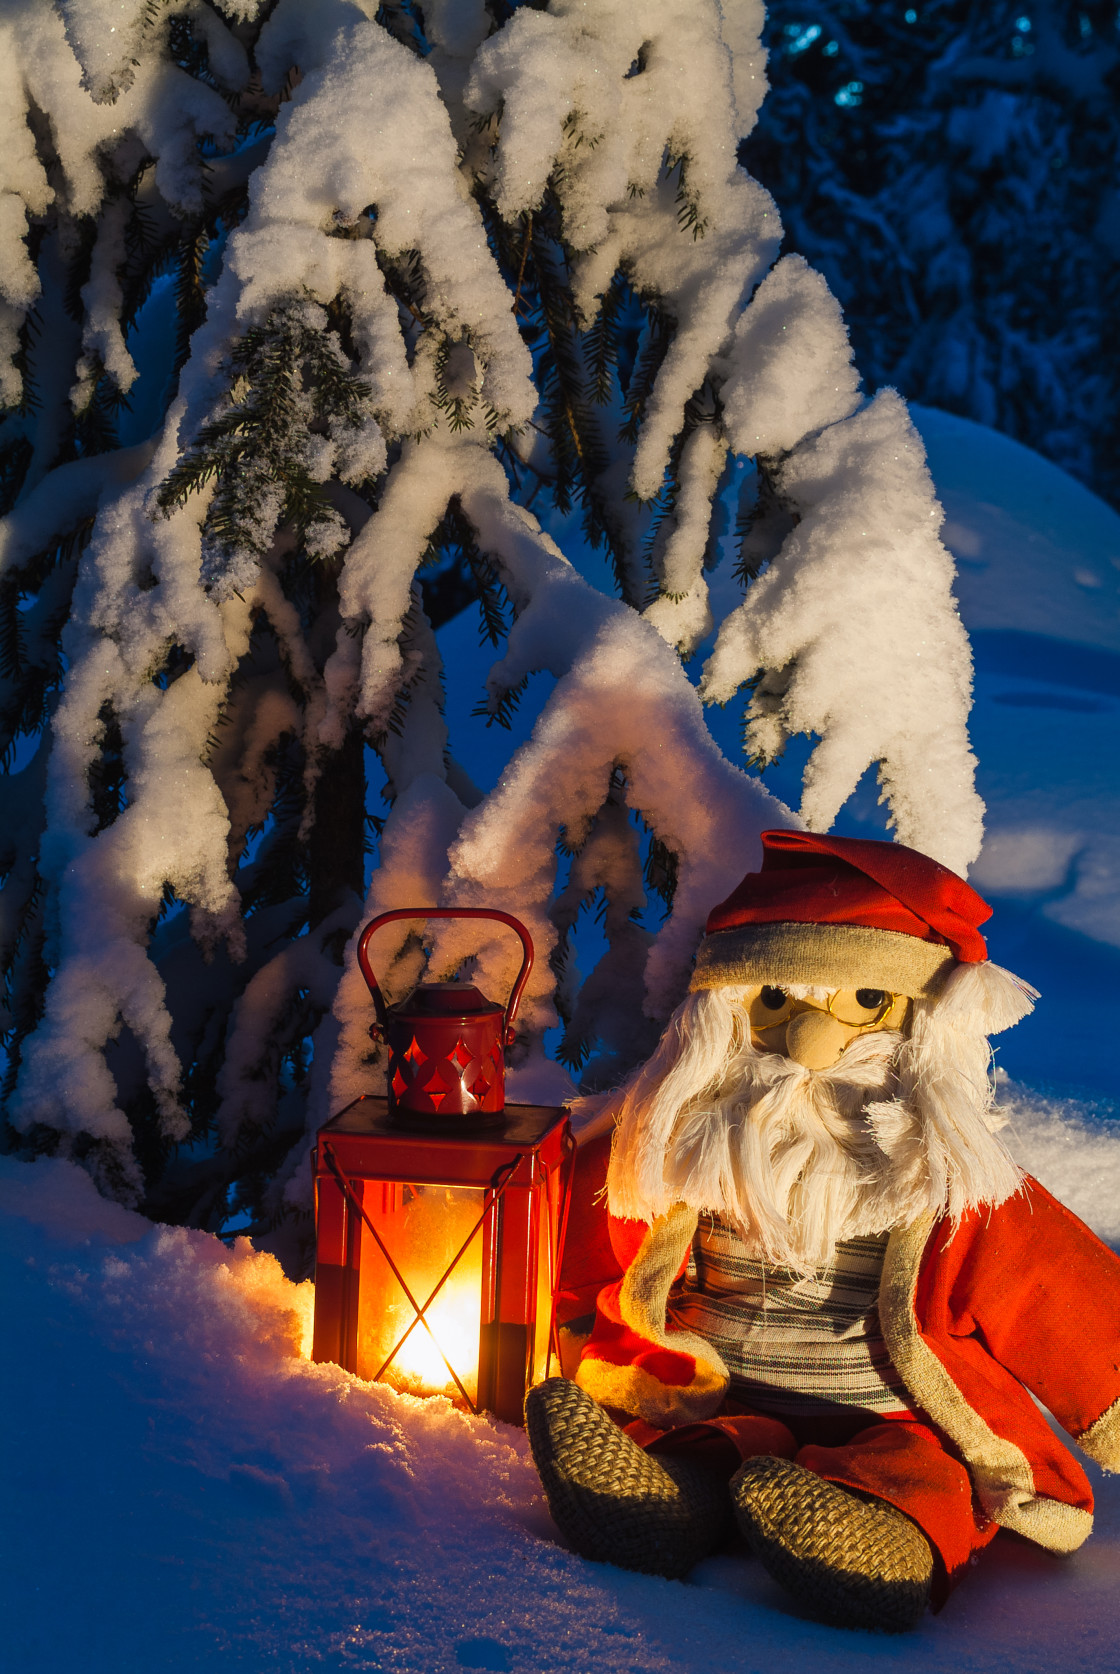 "Father Christmas doll sitting in snow covered forest" stock image